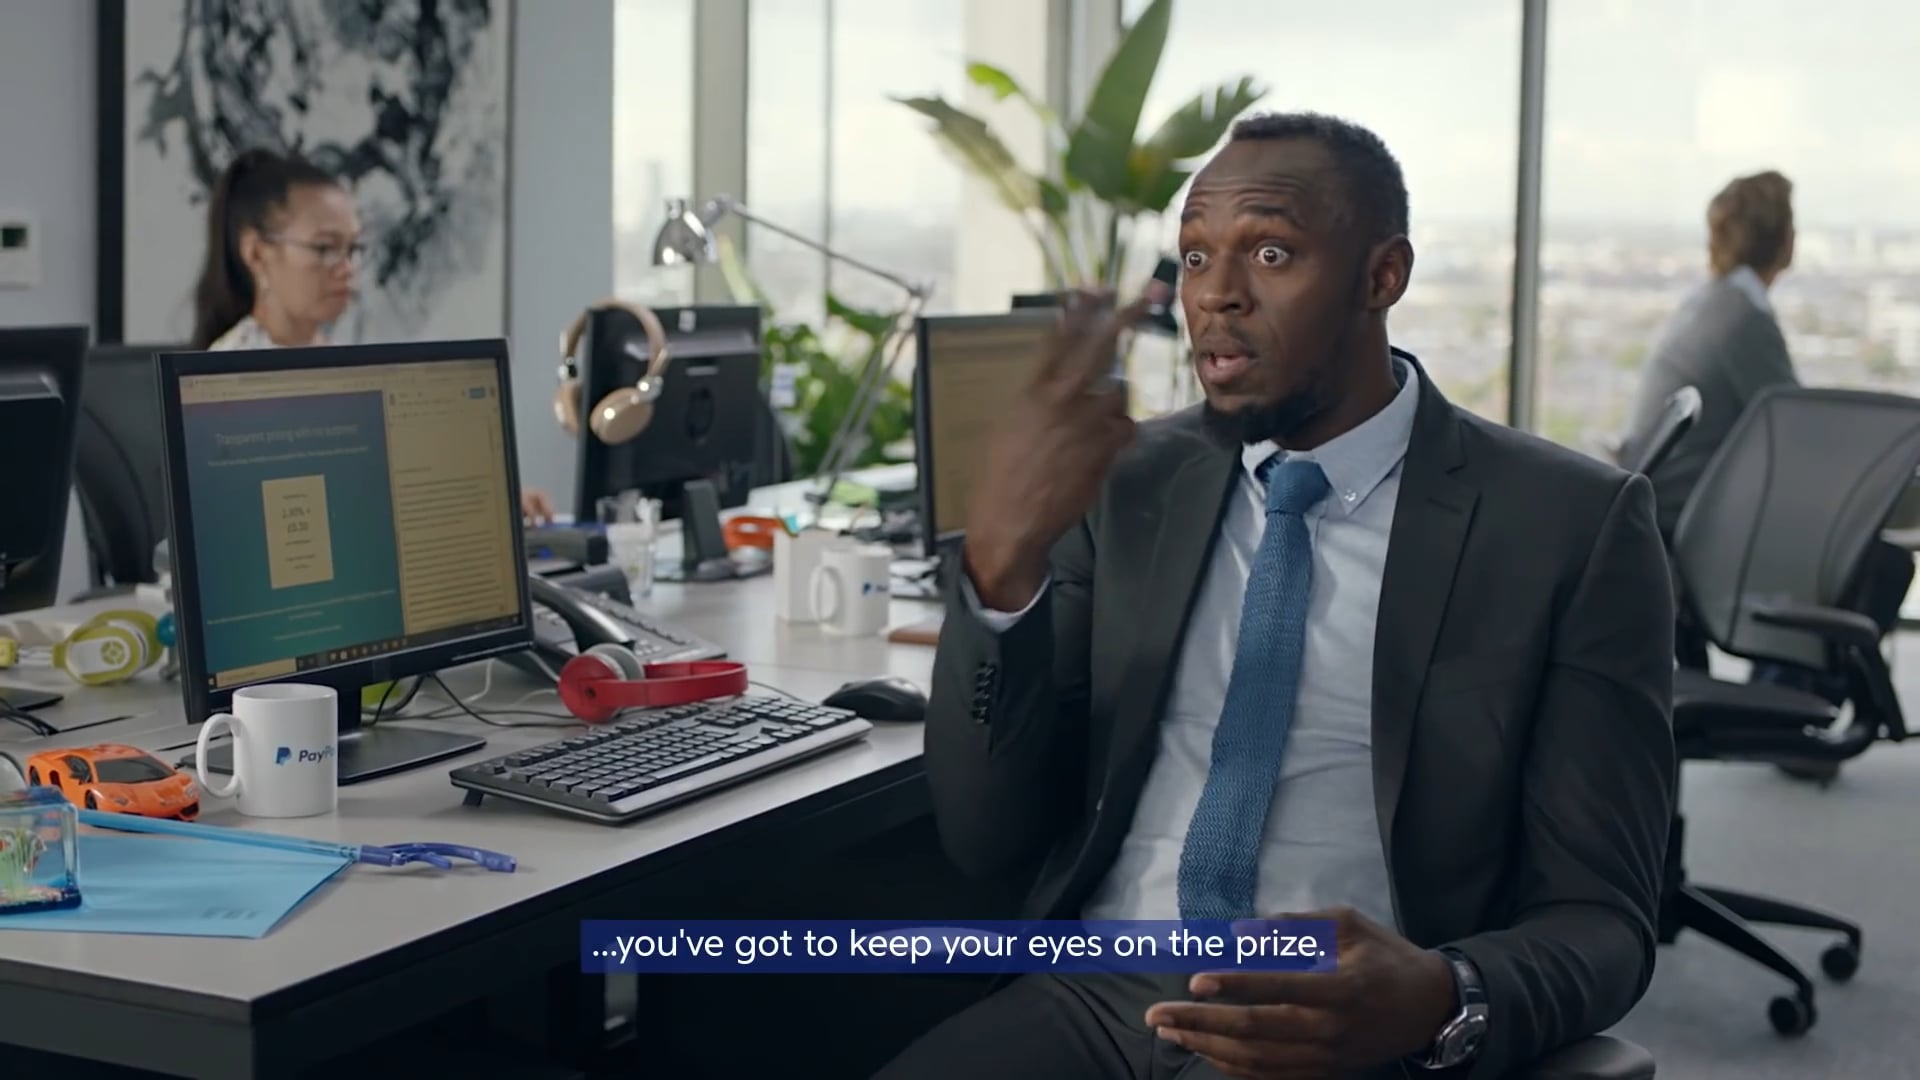 World’s fastest intern – Usain Bolt’s first day working at PayPal (B Camera Operator)